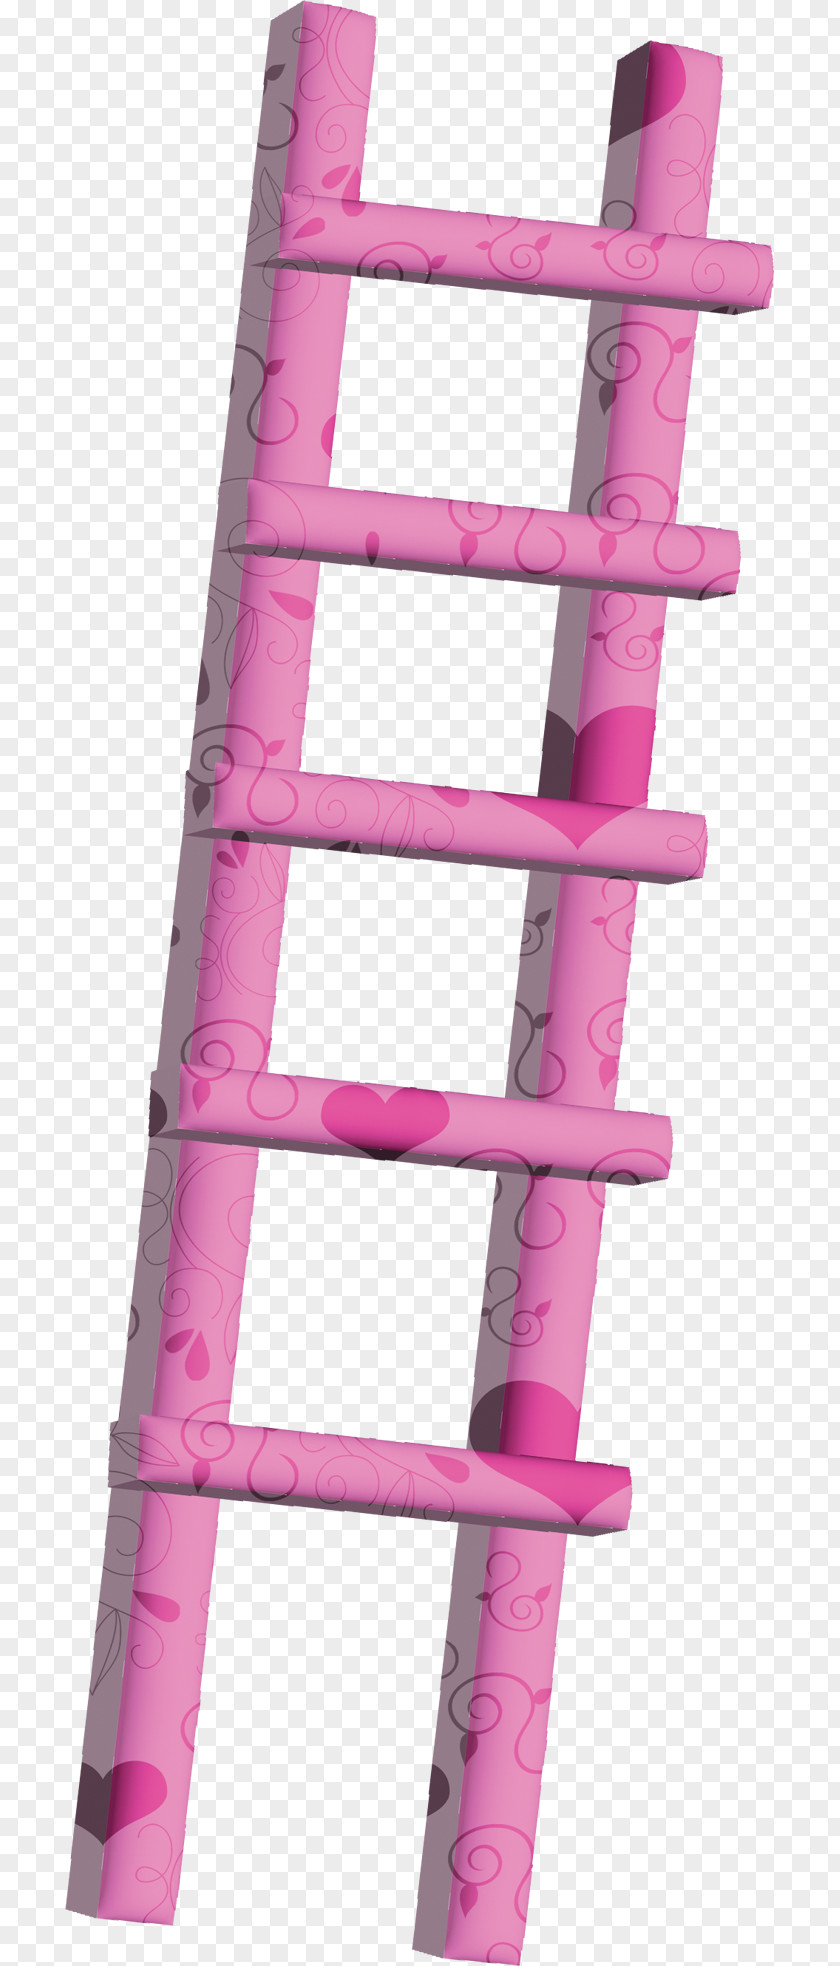 Ladder Icon PNG